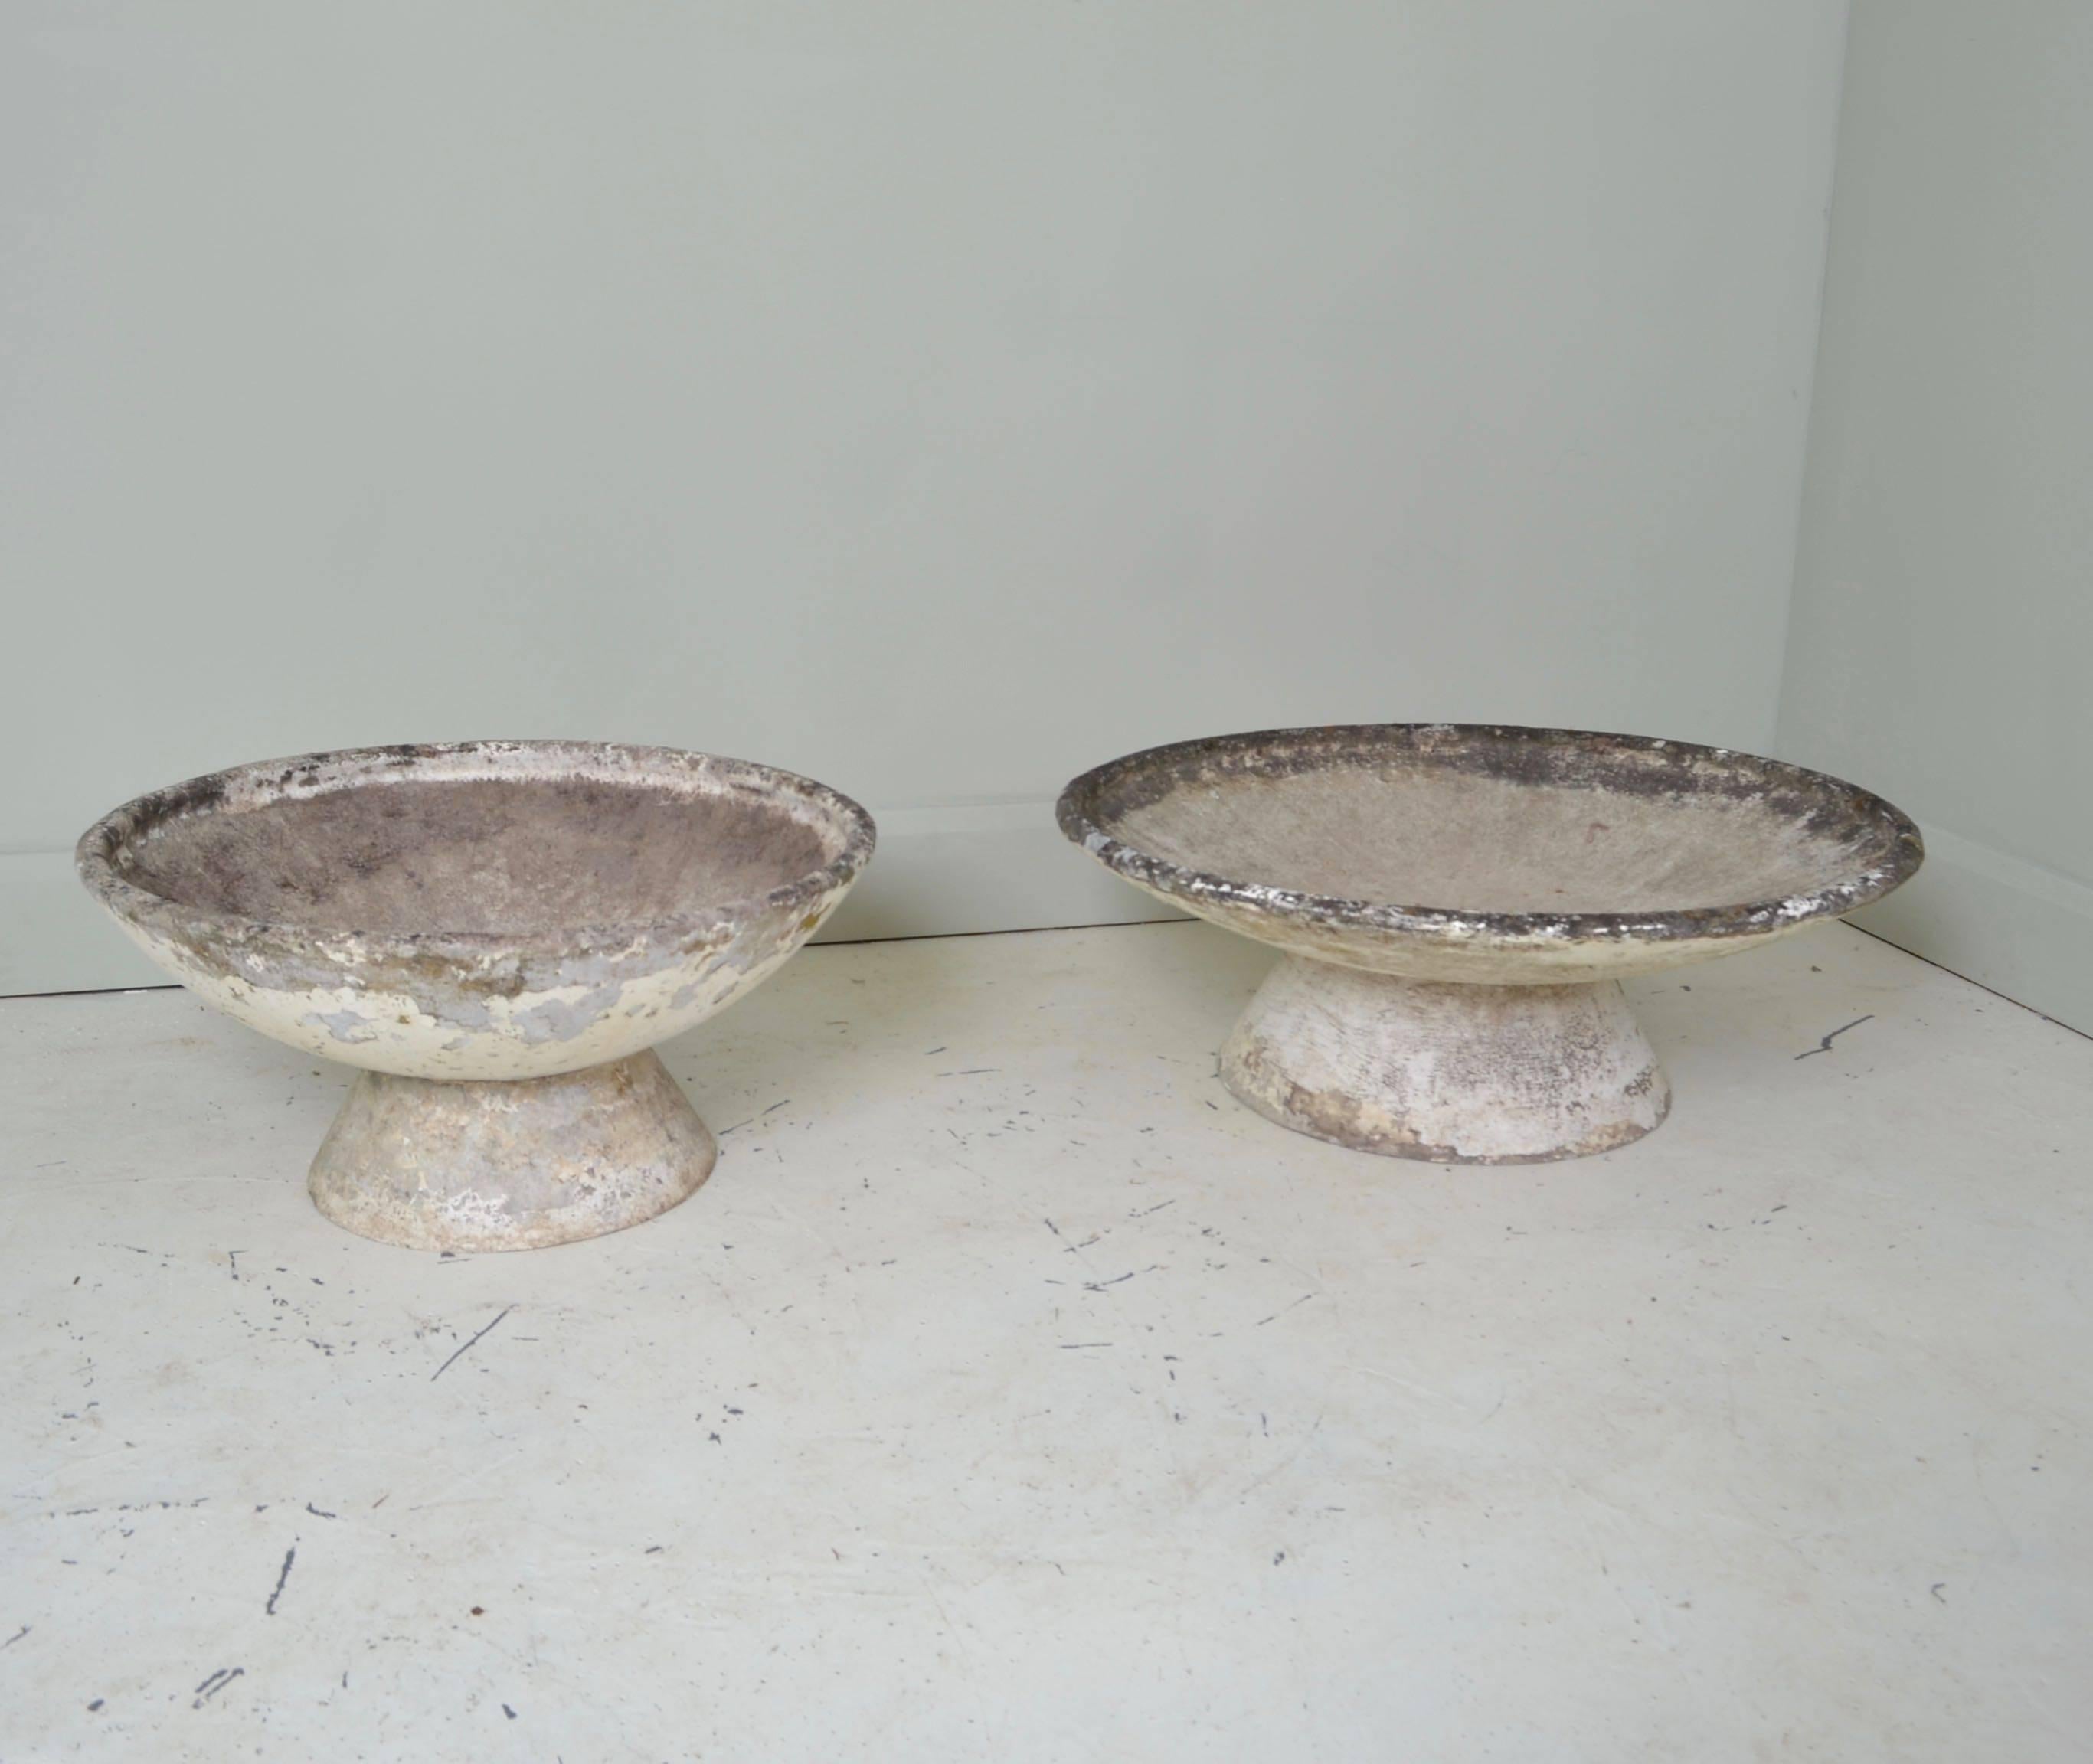 Two fiber concrete jardinières of slightly different sizes designed
by Willy Guhl. Good patination and paint decay.
They sit on plinth bases that allow the jardinières to be tilted into
different positions.
Sizes 100cm diameter x 37cm high
79cm